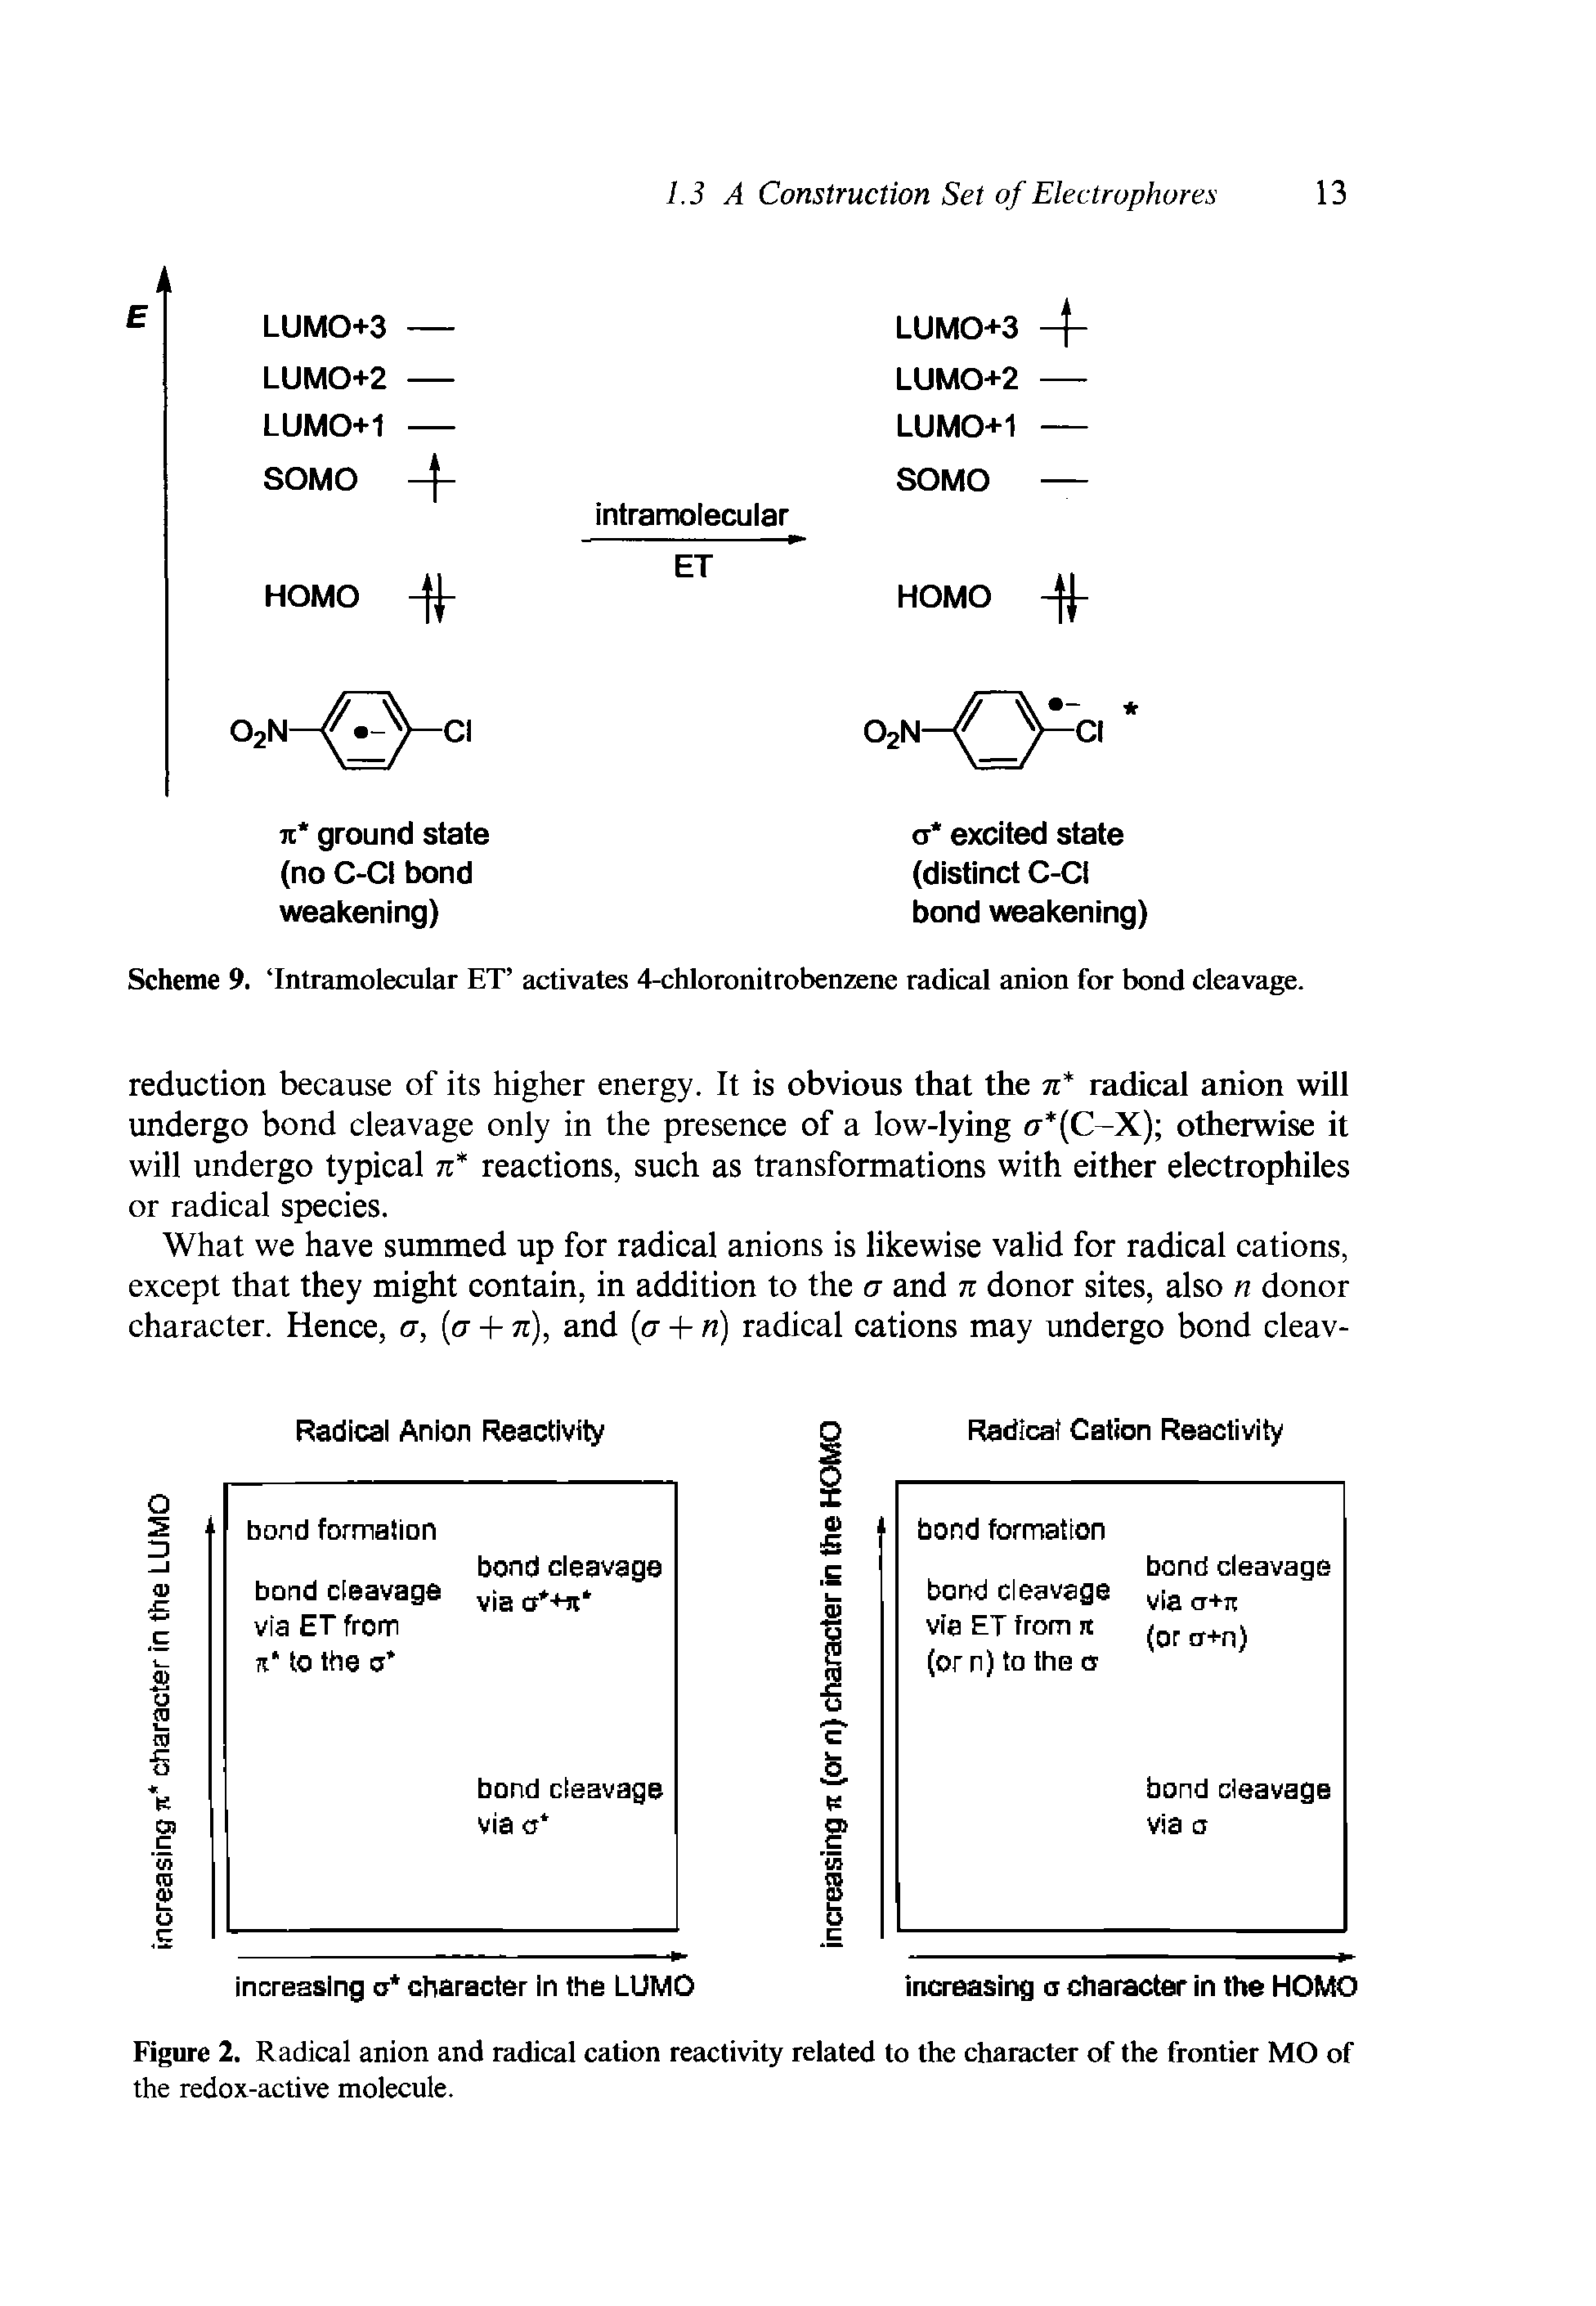 Figure 2. Radical anion and radical cation reactivity related to the character of the frontier MO of the redox-active molecule.